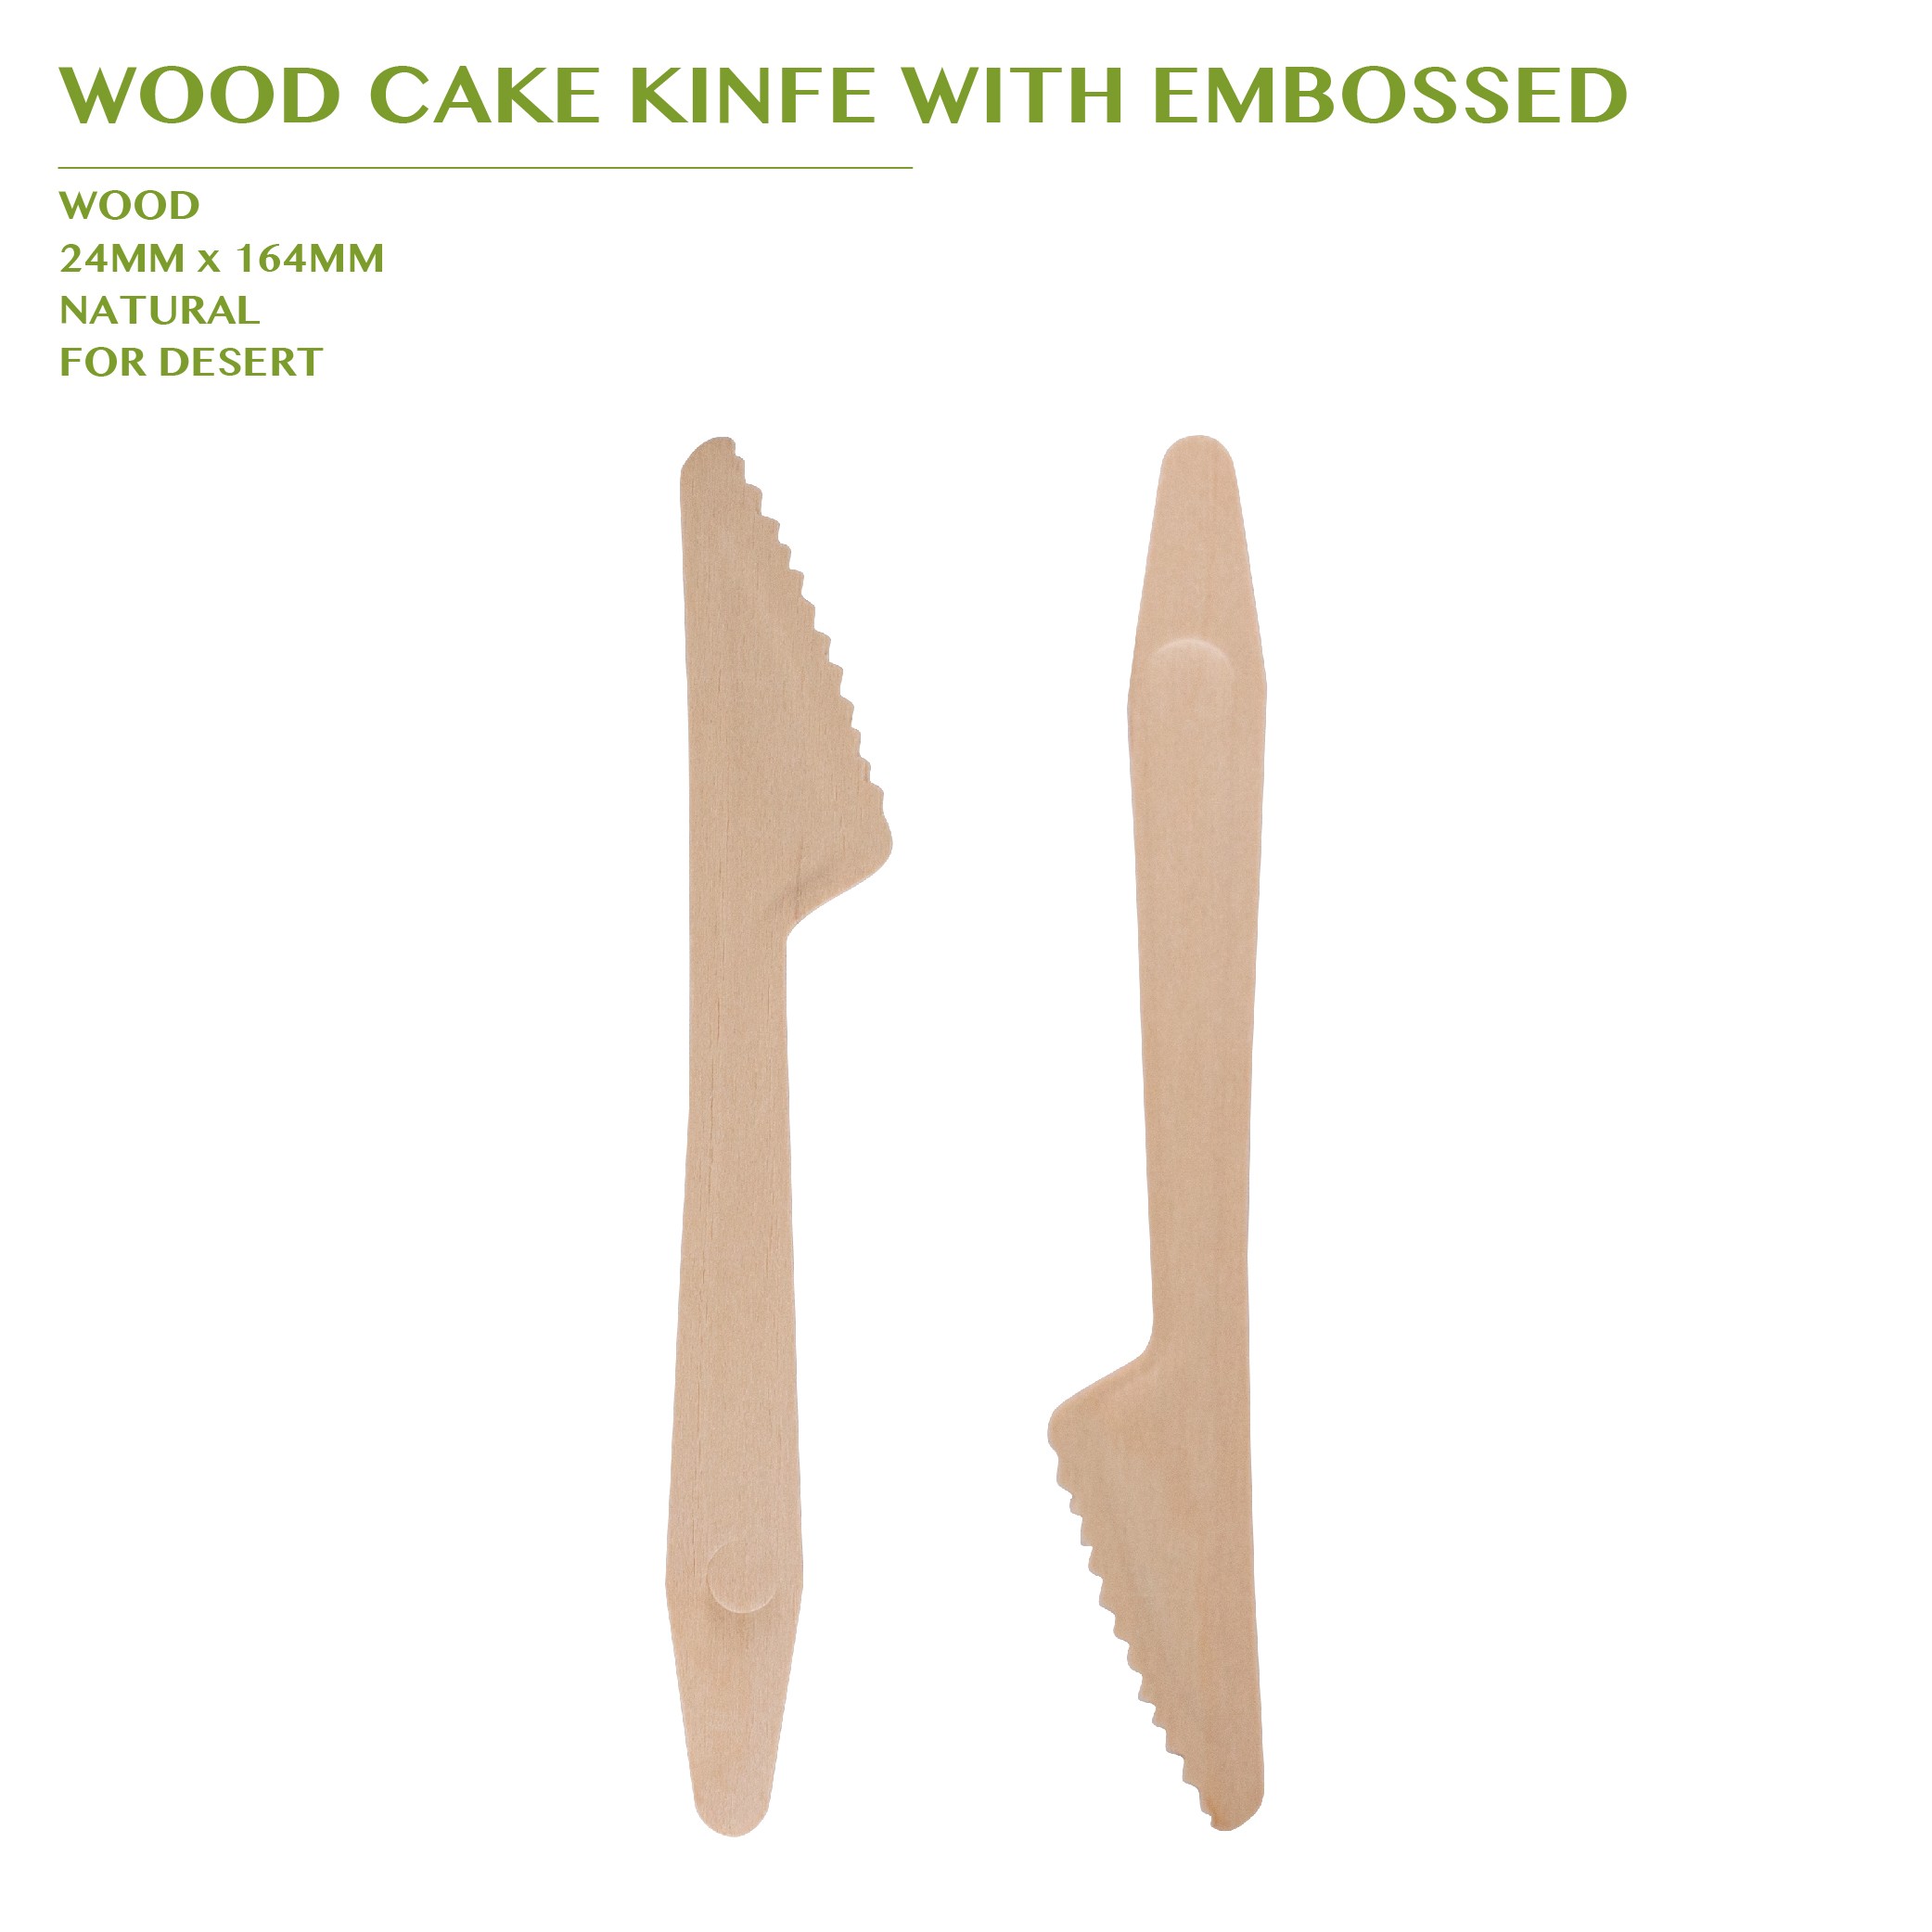 PRE-ORDER WOOD CAKE KINFE WITH EMBOSSED